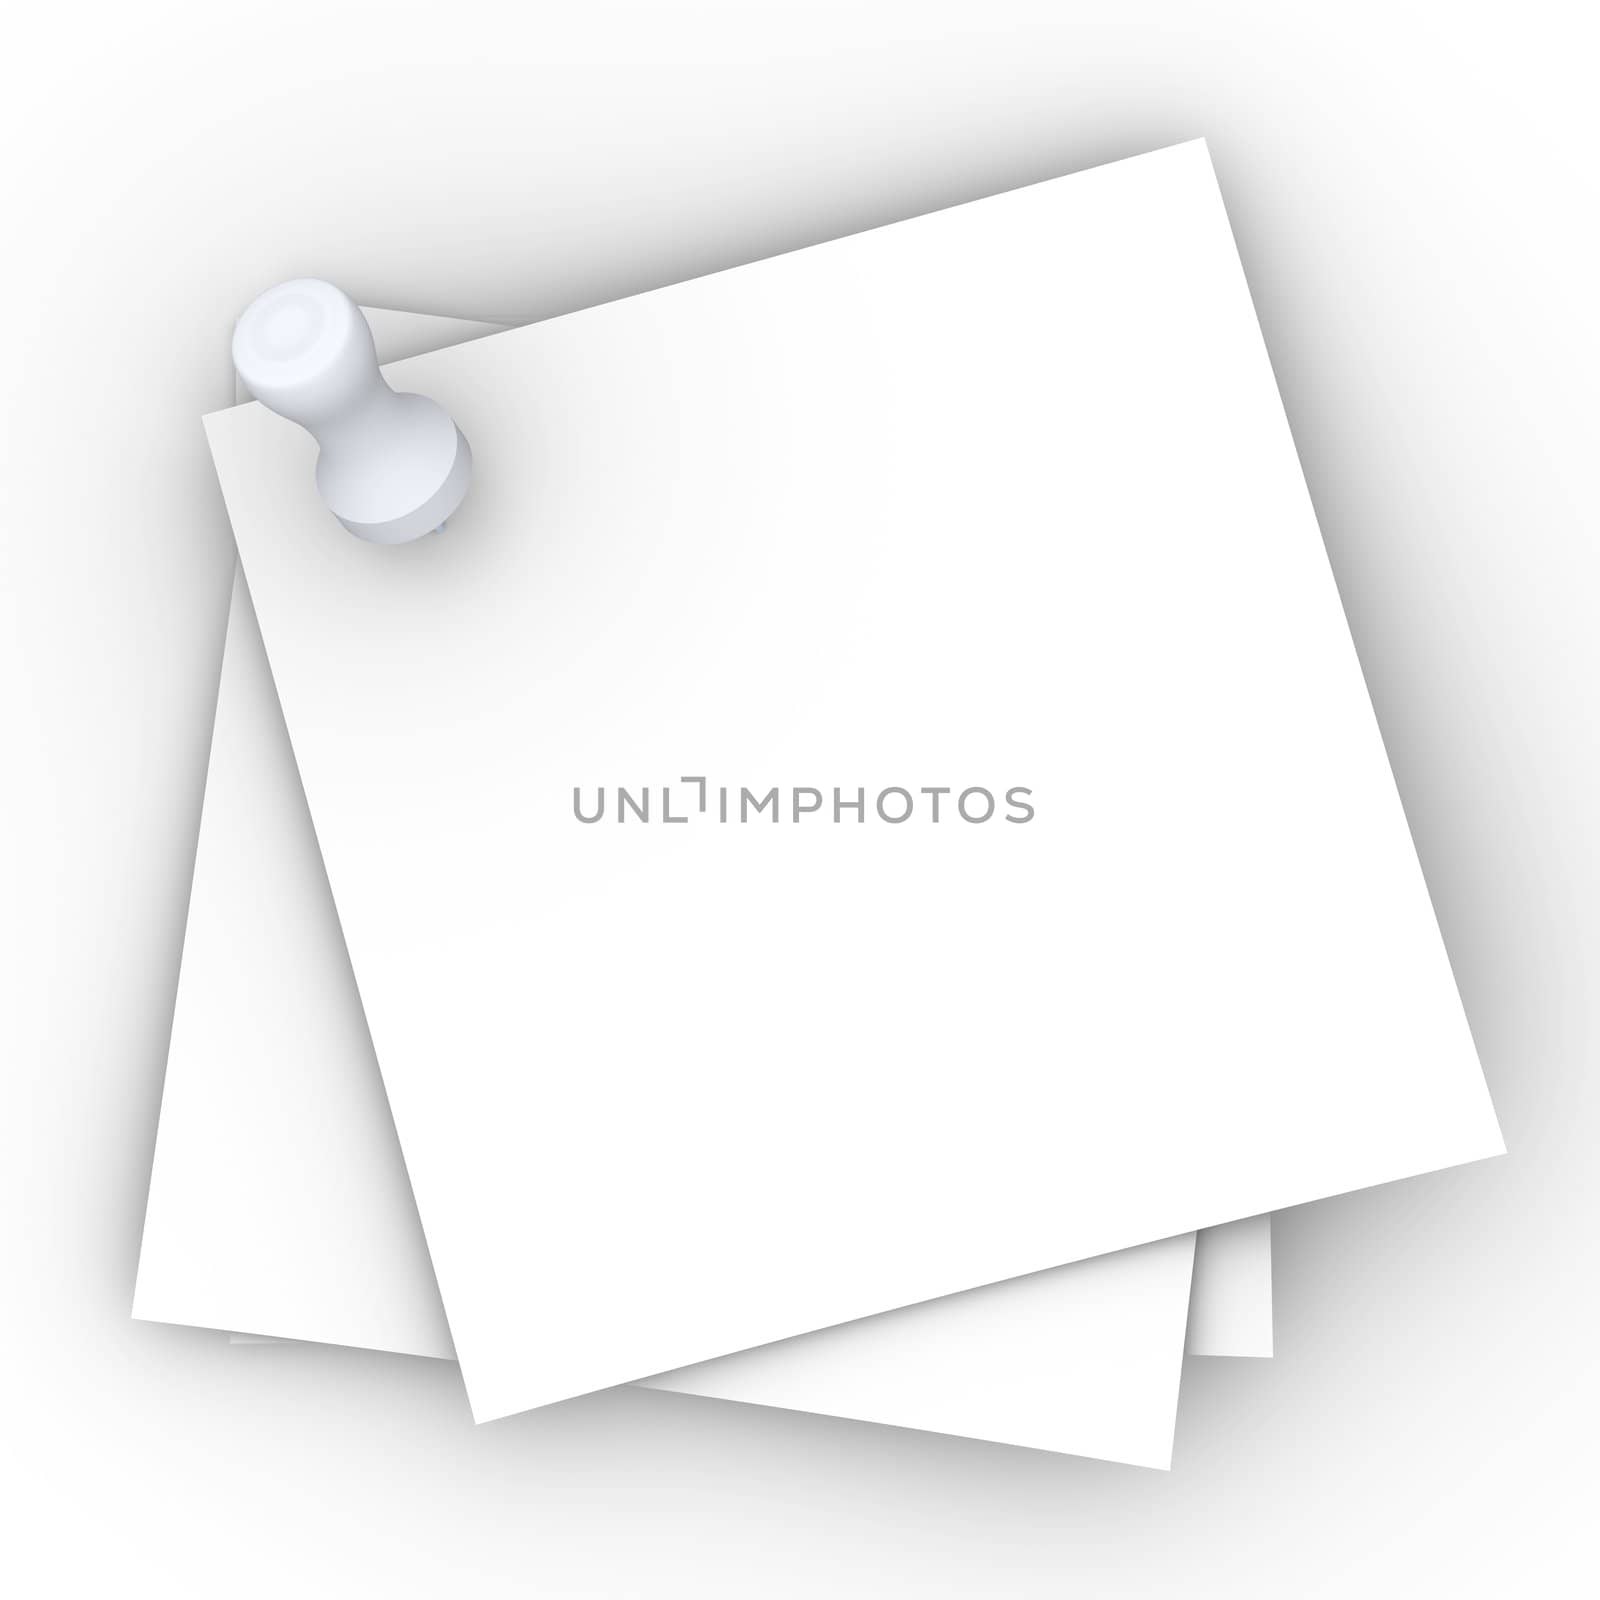 3D rendered Illustration. Blank pinned notes. Isolated on white.
